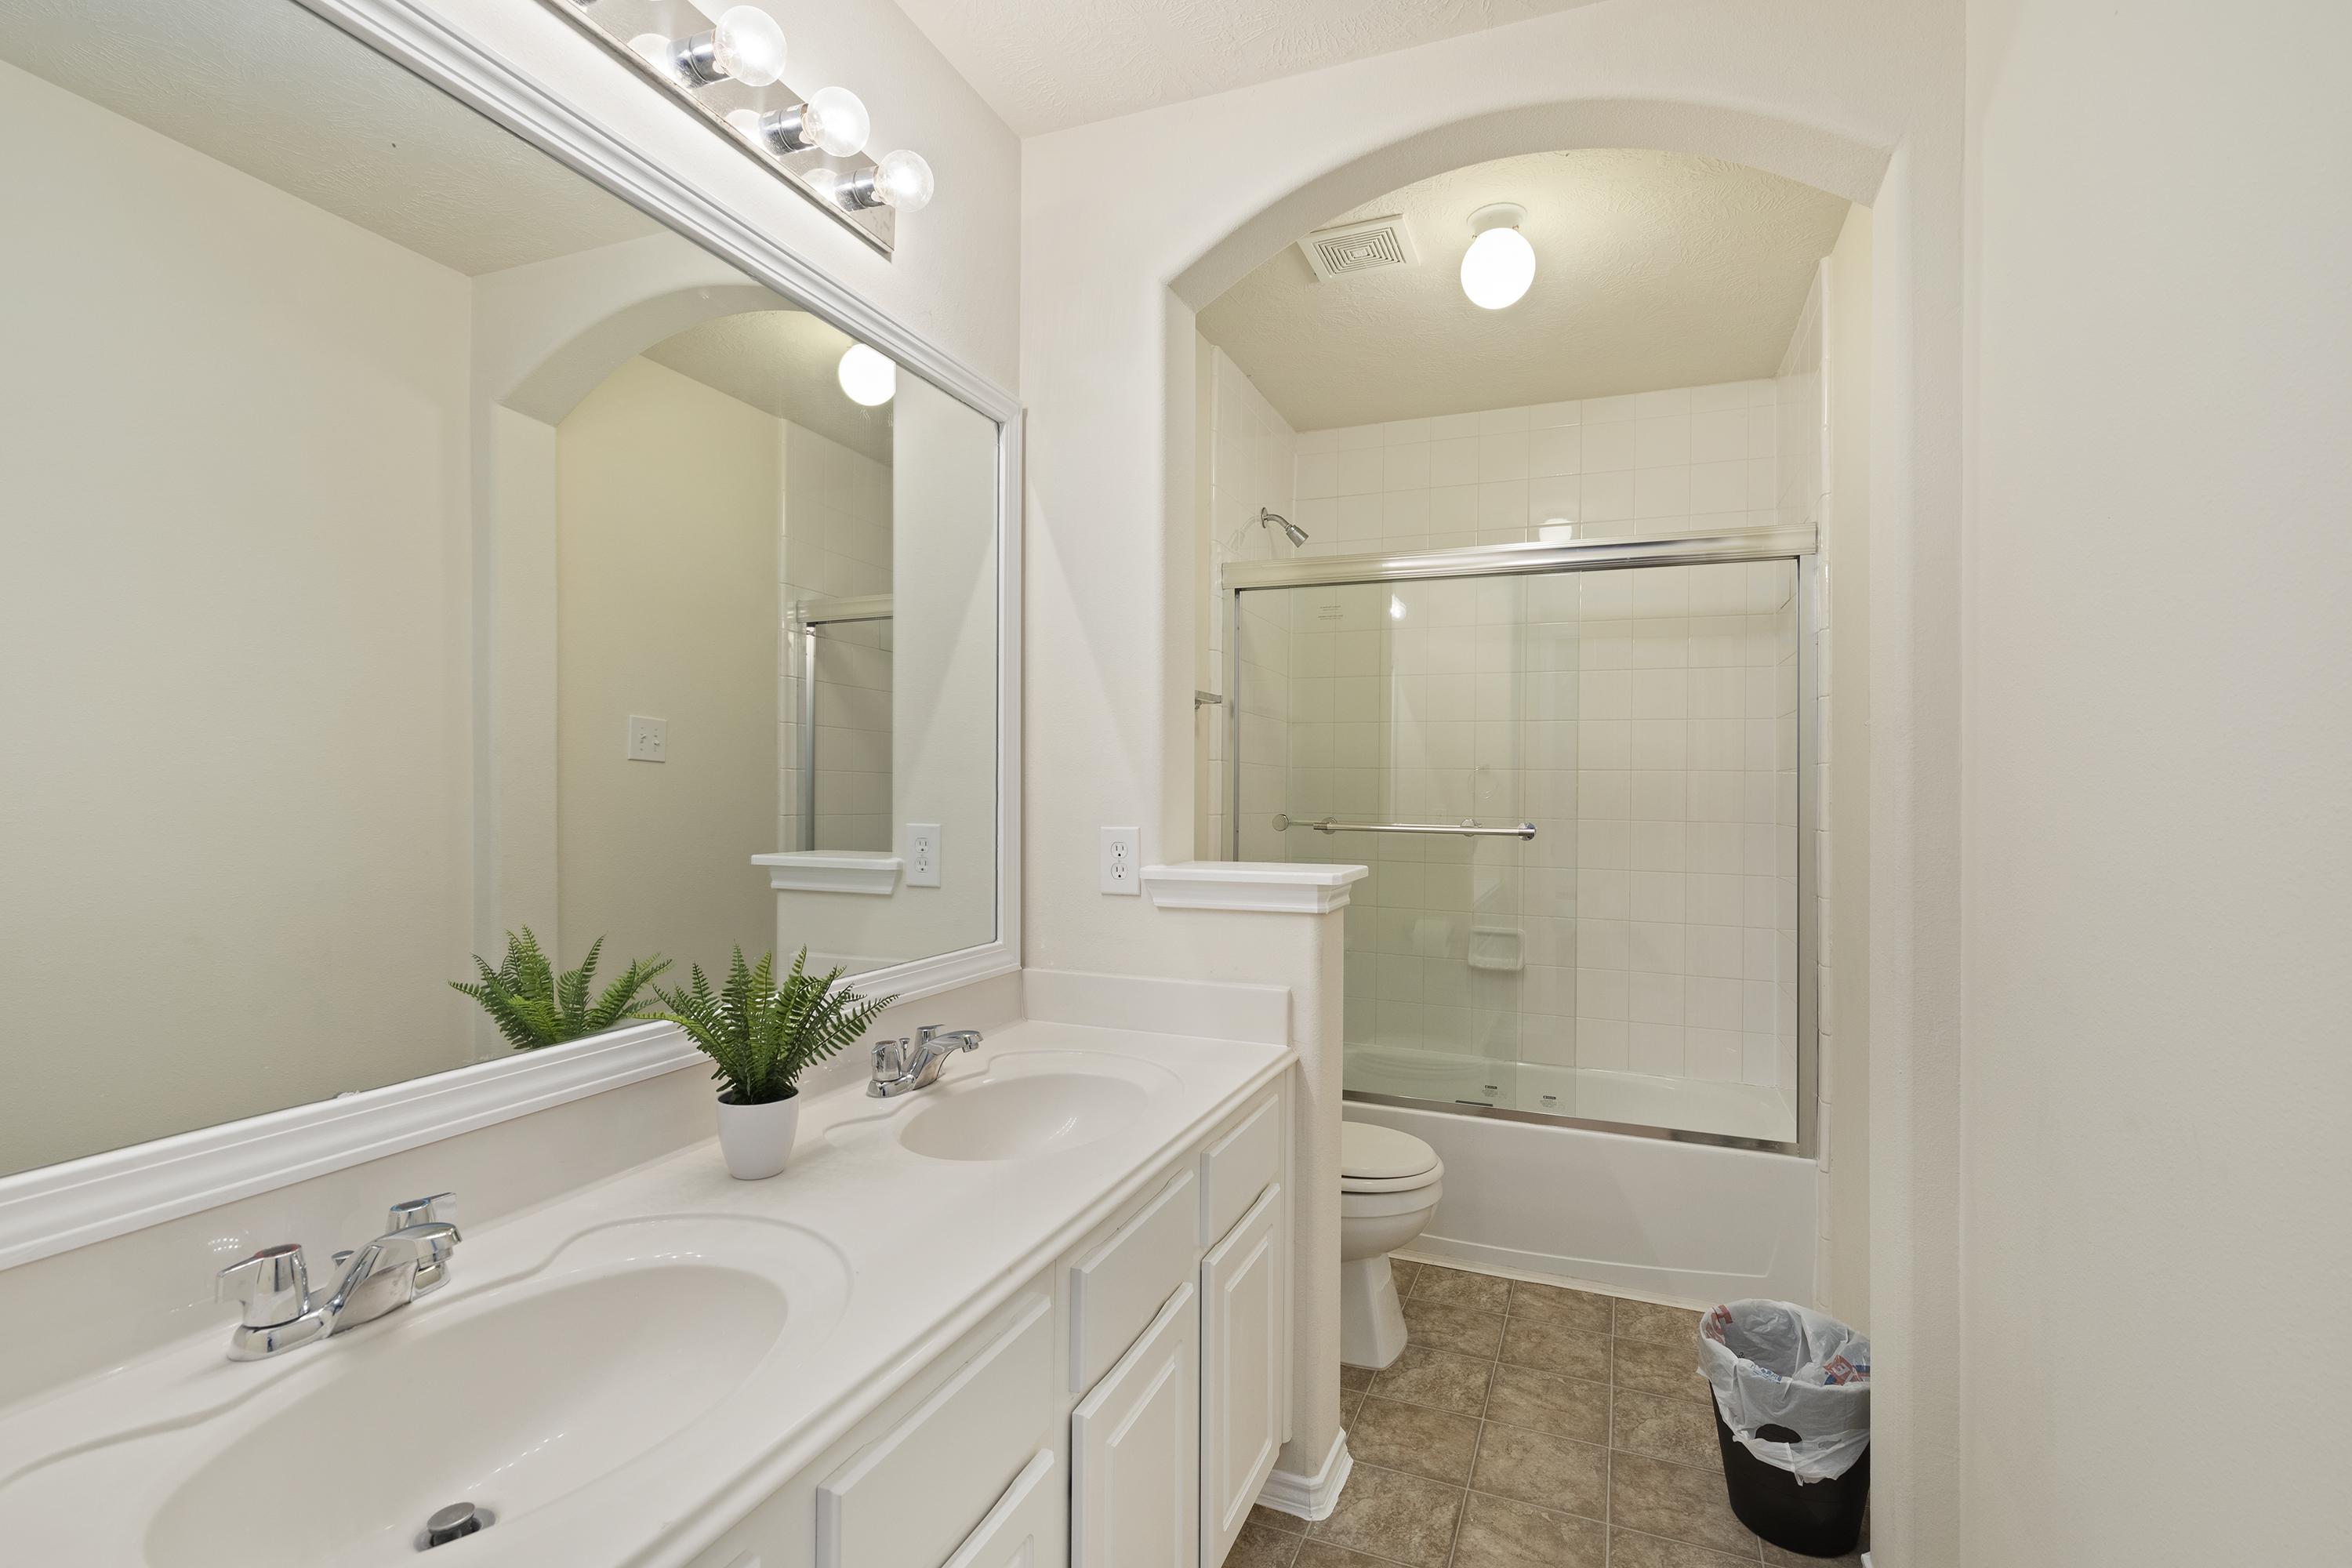 Double vanity is the standard for our royal tenants. This second bathroom has standup shower with tub